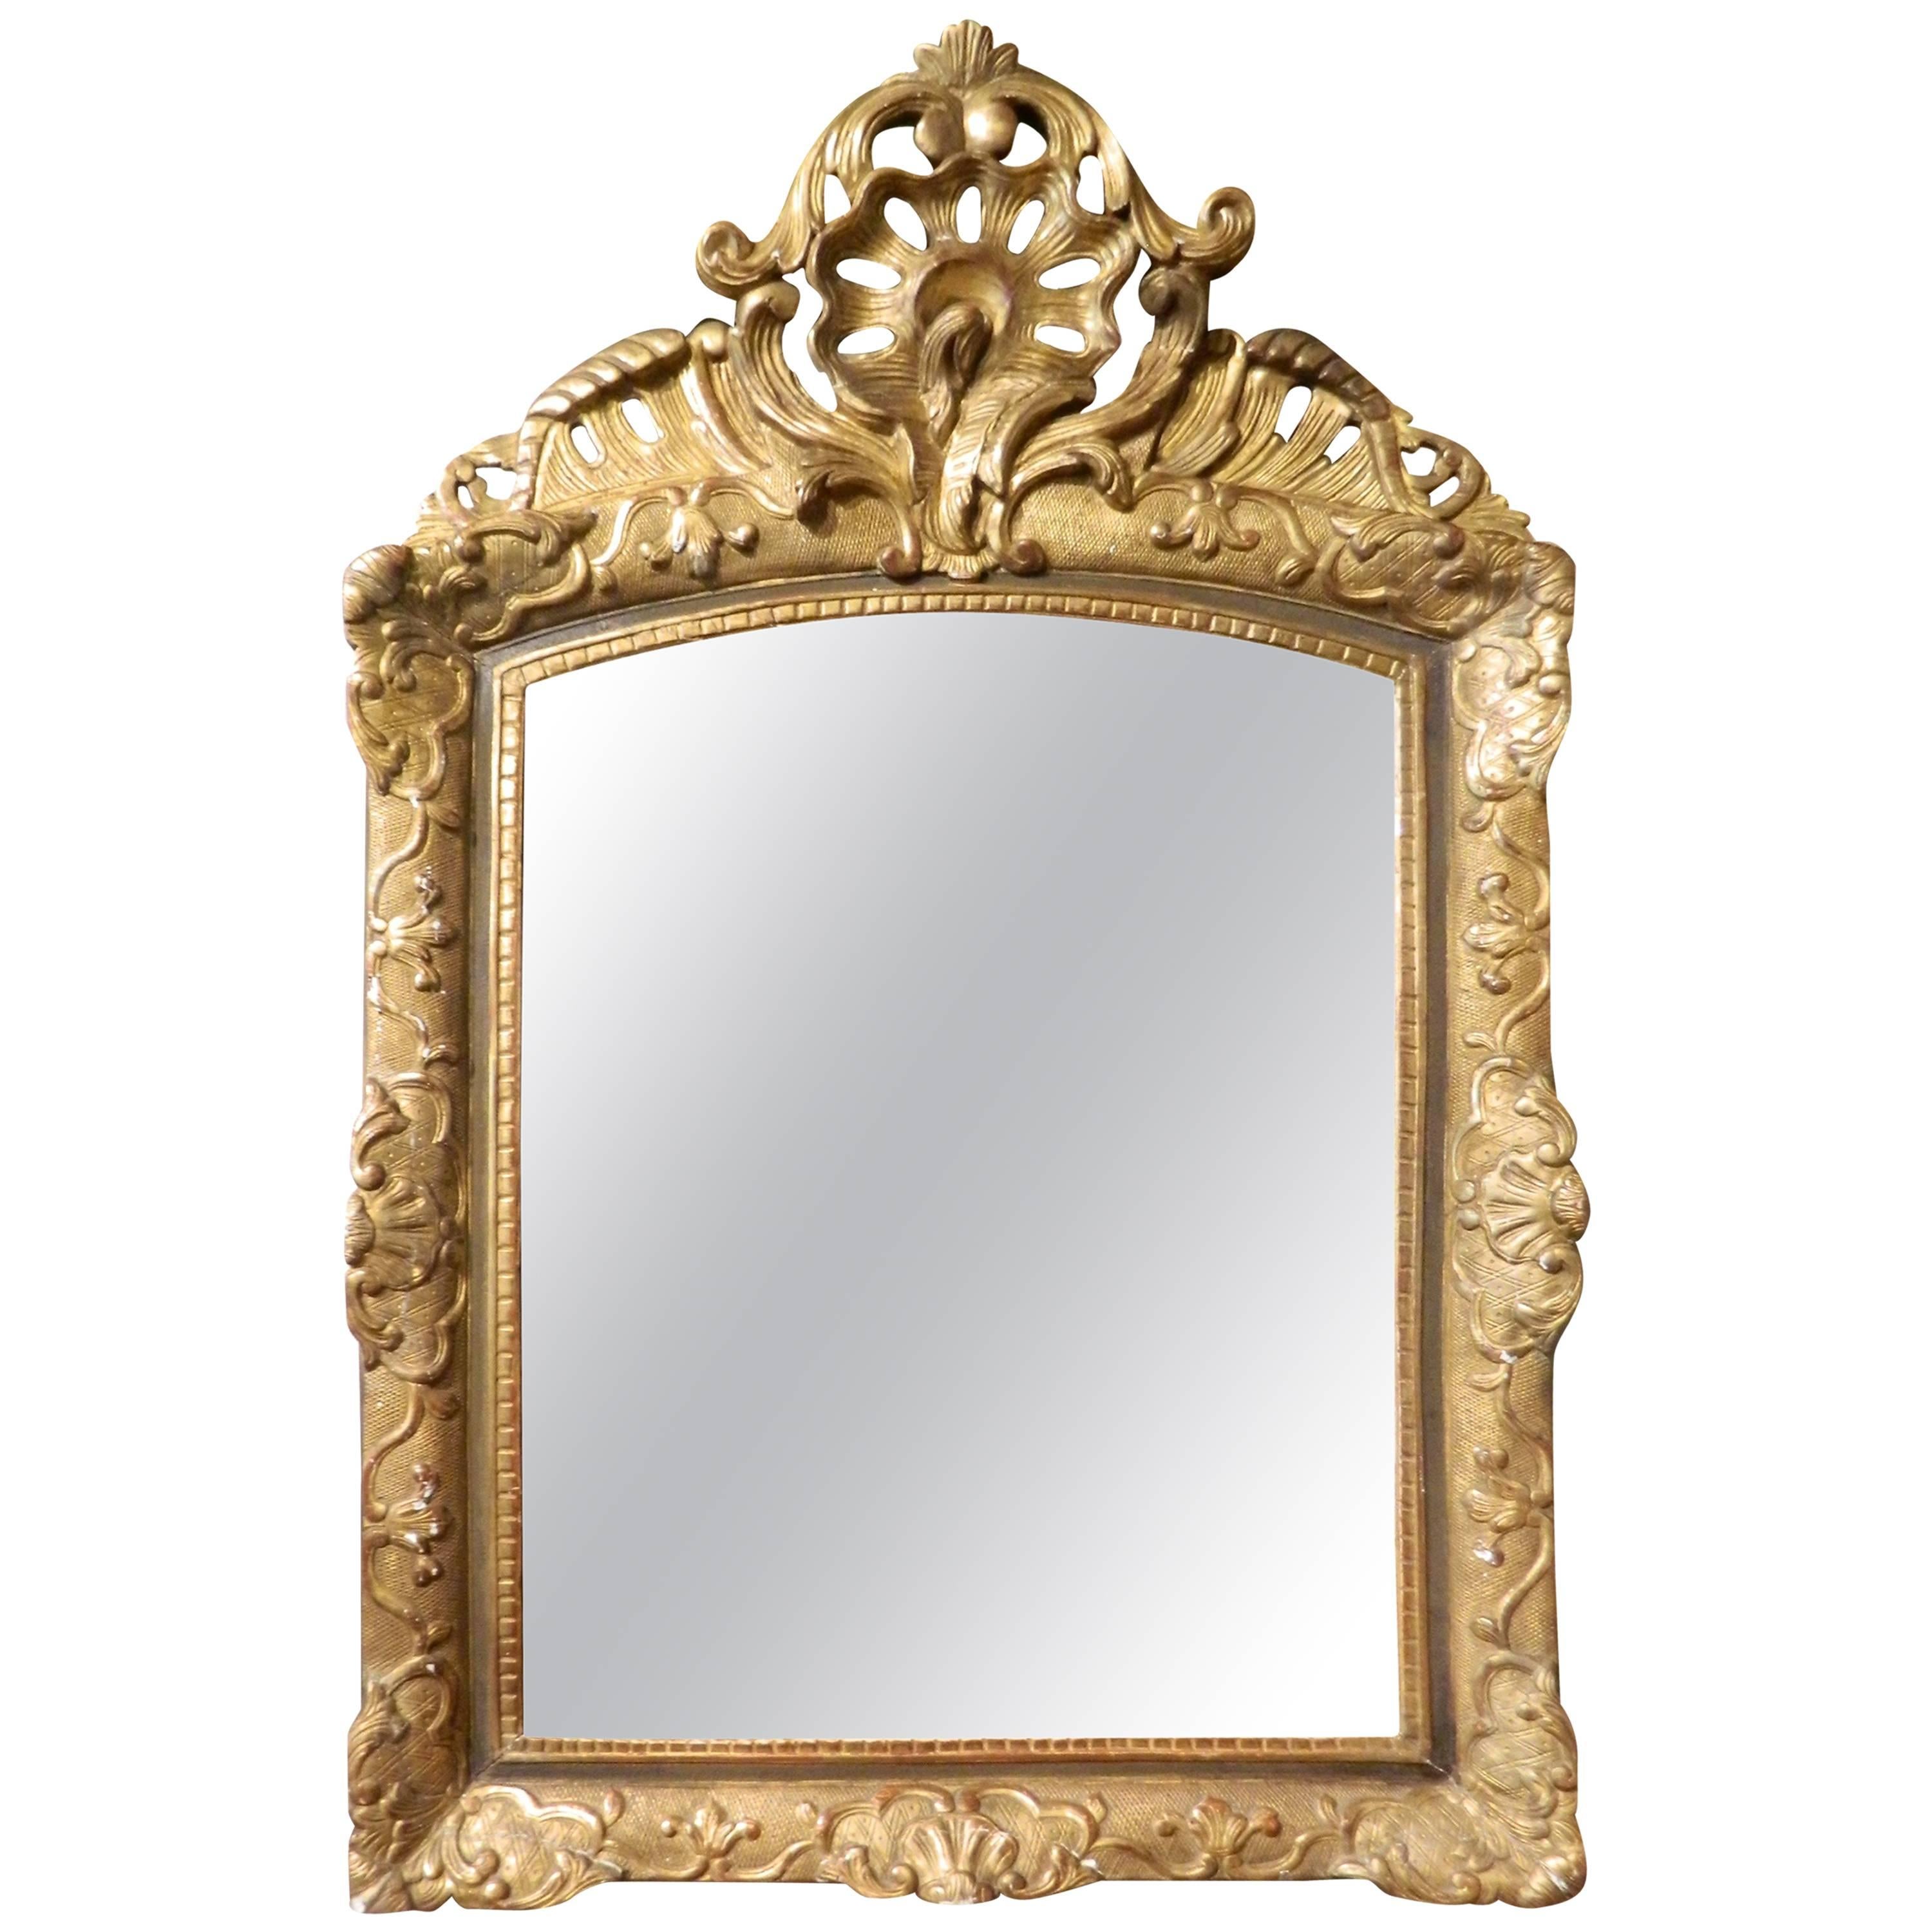 Italian Gilt Gesso Mirror Adorned with a Rocaille Crest, 18th Century For Sale